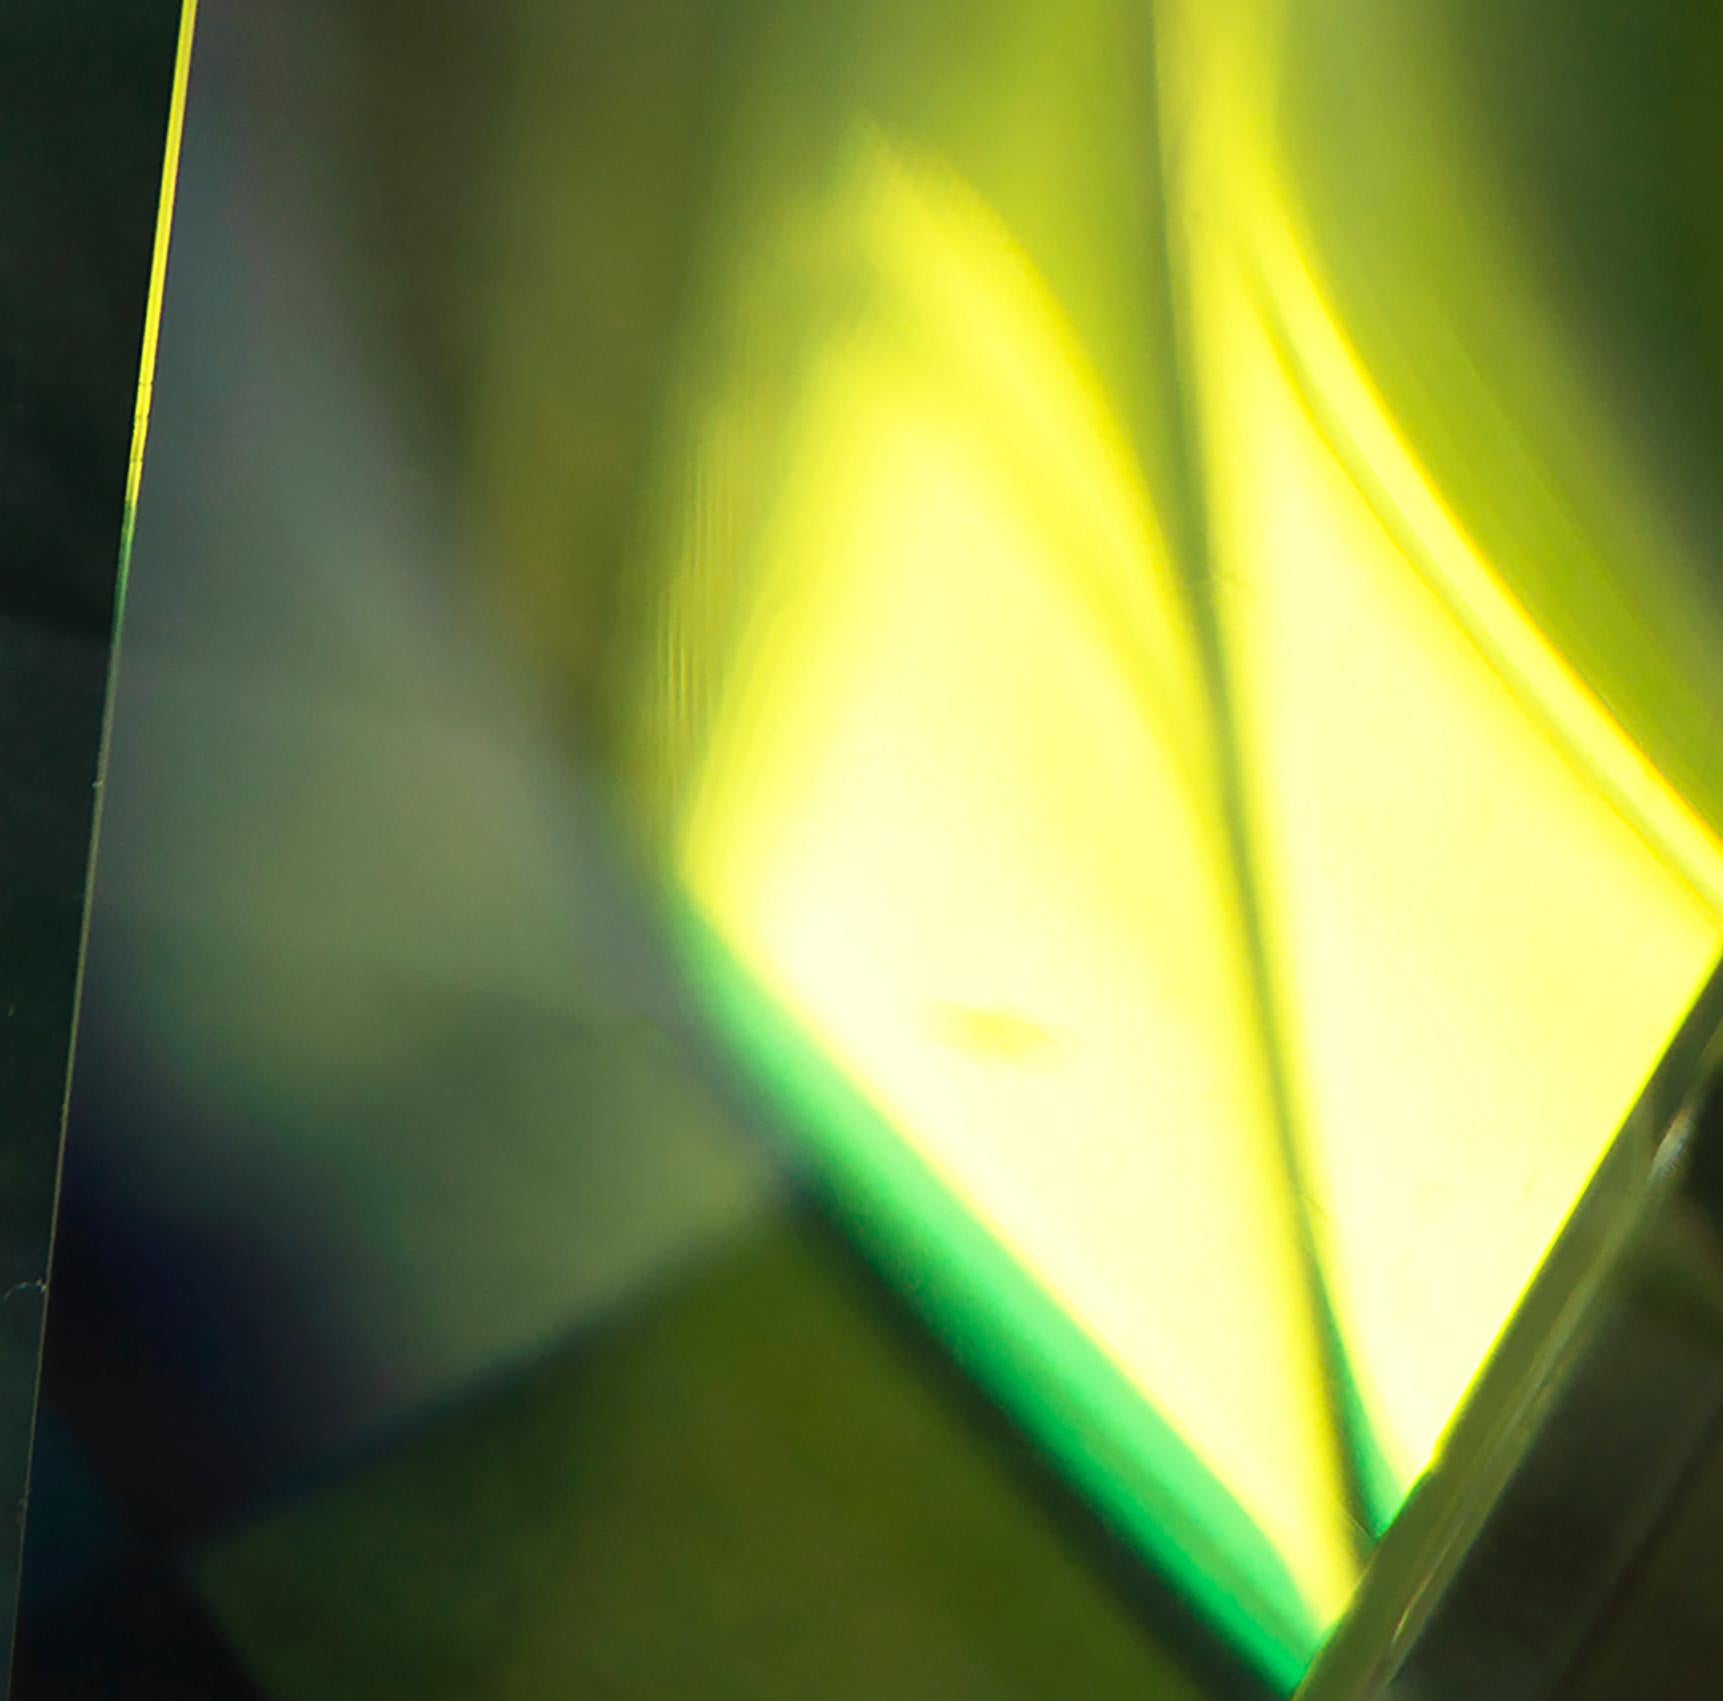 Heartbroken: abstract photograph commemorating George Floyd w/ blue green & gold - Photograph by Diane Lachman